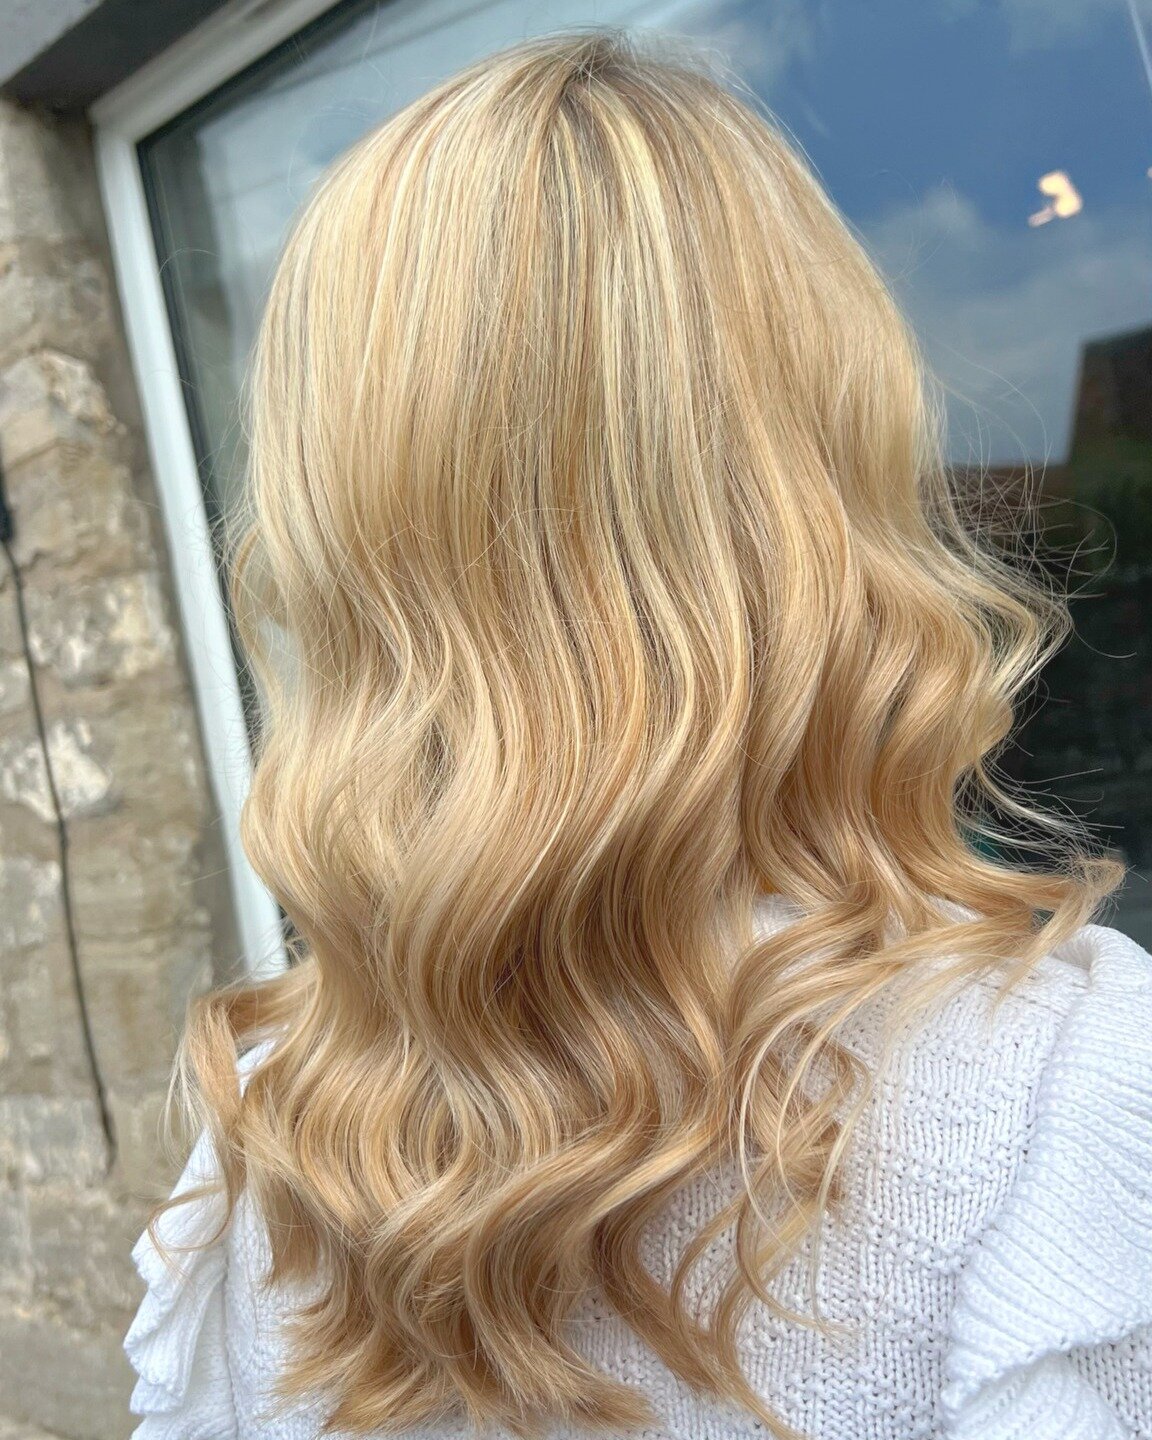 Our apprentice Hattie used a half head of foils to lighten and touch up her clients roots. A beautiful colour for summer ✨

Book online with Hattie

#dermaplaning #dermaplane #skinpeel #aesthetics #skingoals #acnescarring #ghd #ghdproducts #ghdhairdr